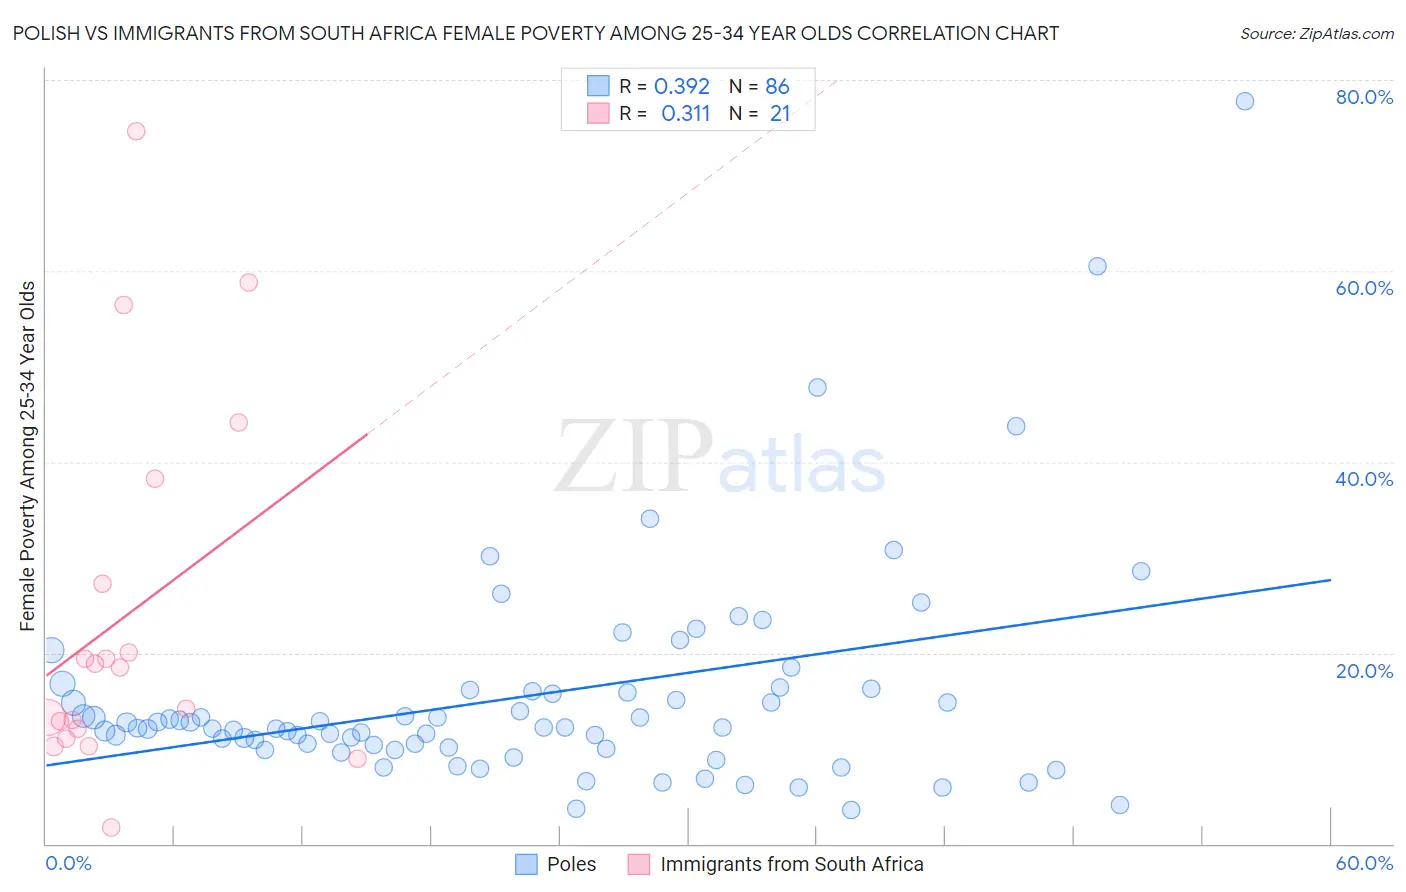 Polish vs Immigrants from South Africa Female Poverty Among 25-34 Year Olds